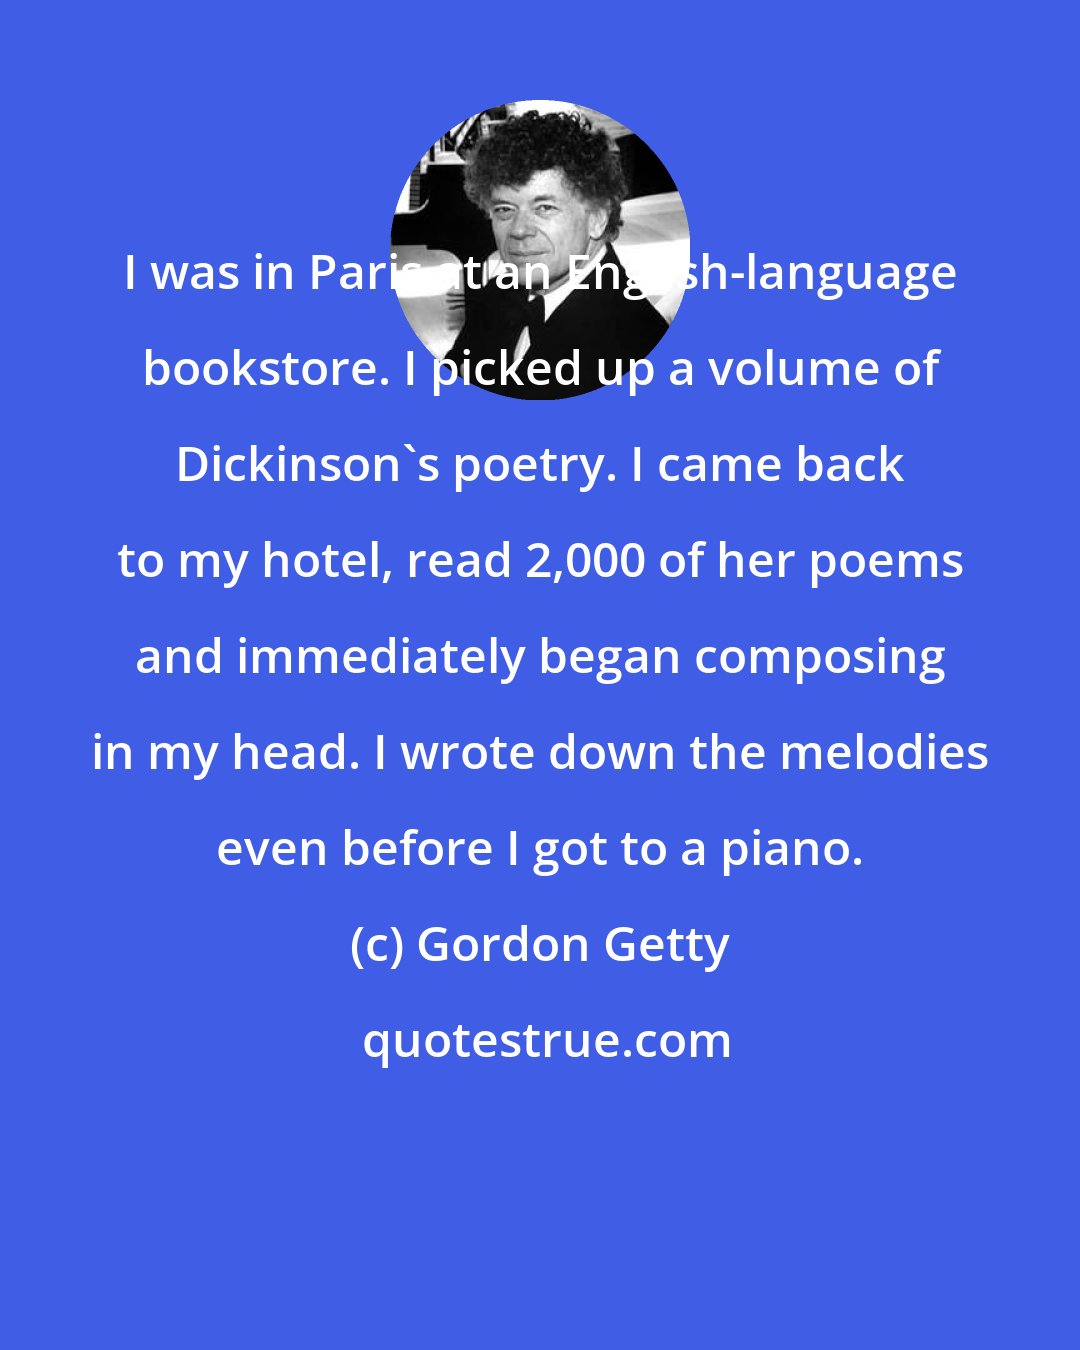 Gordon Getty: I was in Paris at an English-language bookstore. I picked up a volume of Dickinson's poetry. I came back to my hotel, read 2,000 of her poems and immediately began composing in my head. I wrote down the melodies even before I got to a piano.